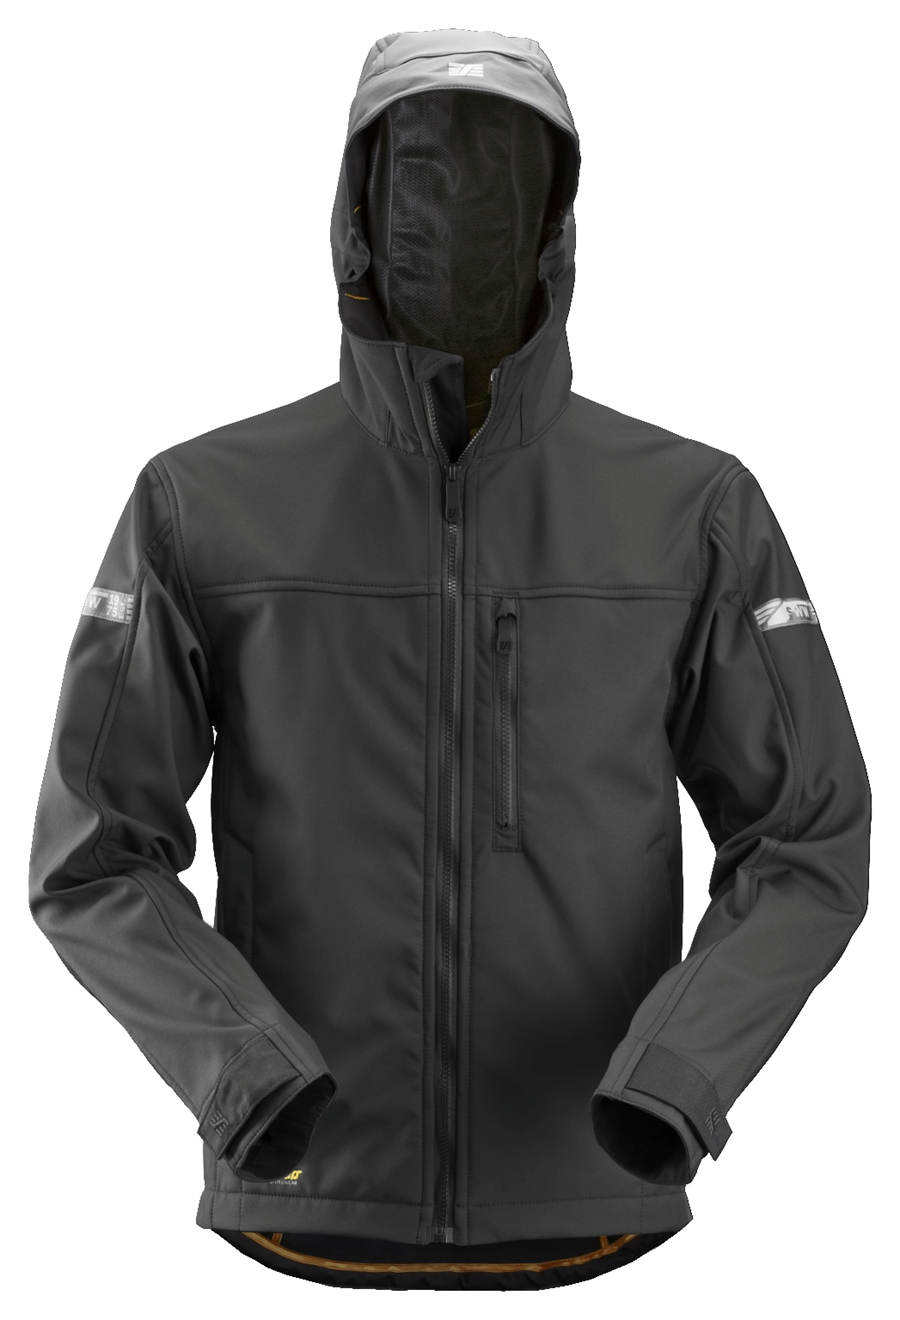 Snickers 1229 AllroundWork Soft Shell Jack met capuchon